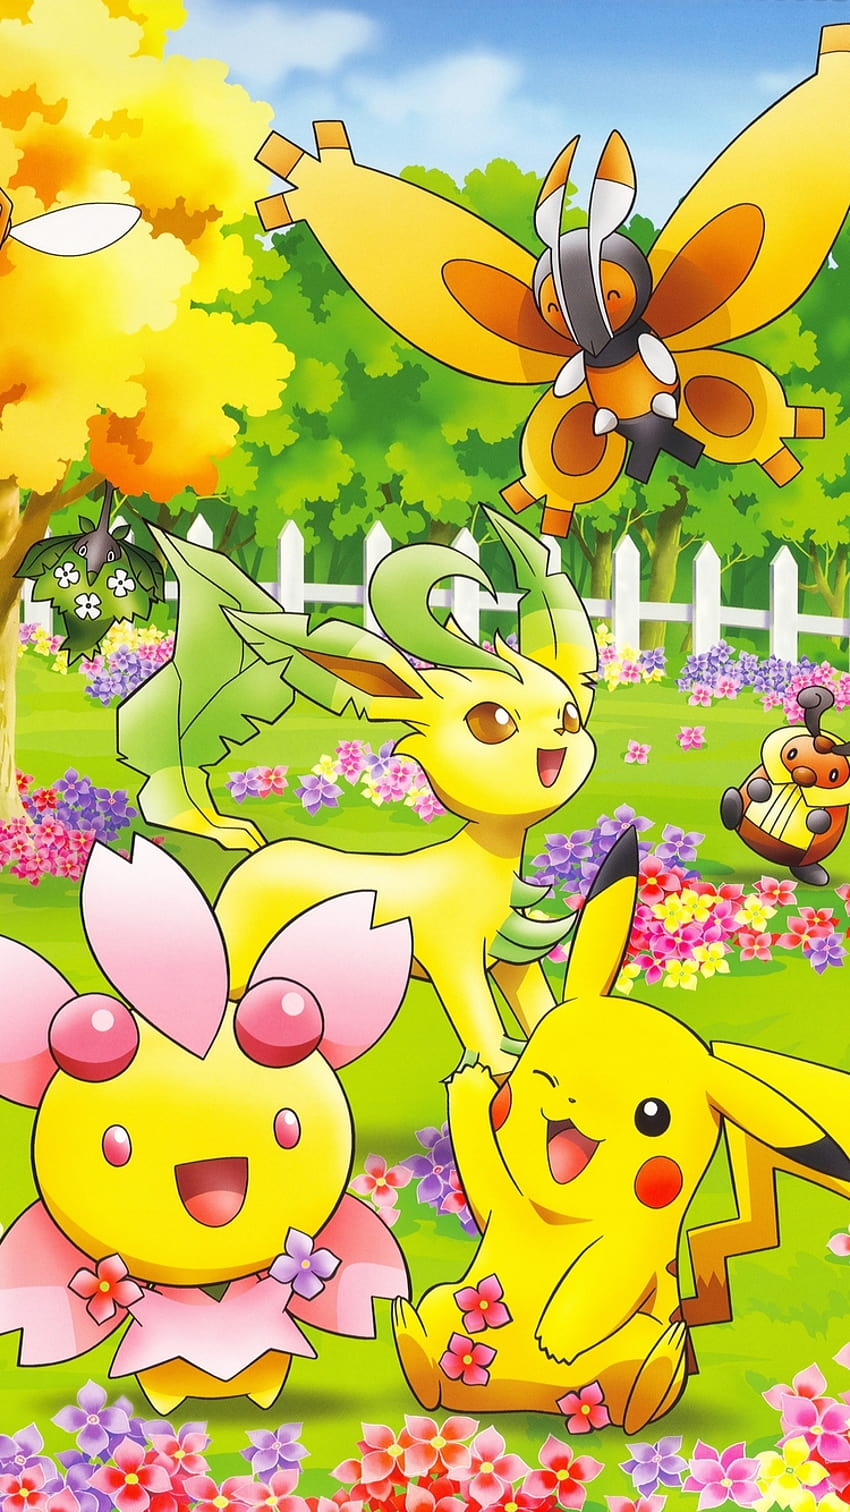 Cute Pokemon on iPhone 7 with Colorful Natures Backgrounds, iphone pokemon HD phone wallpaper